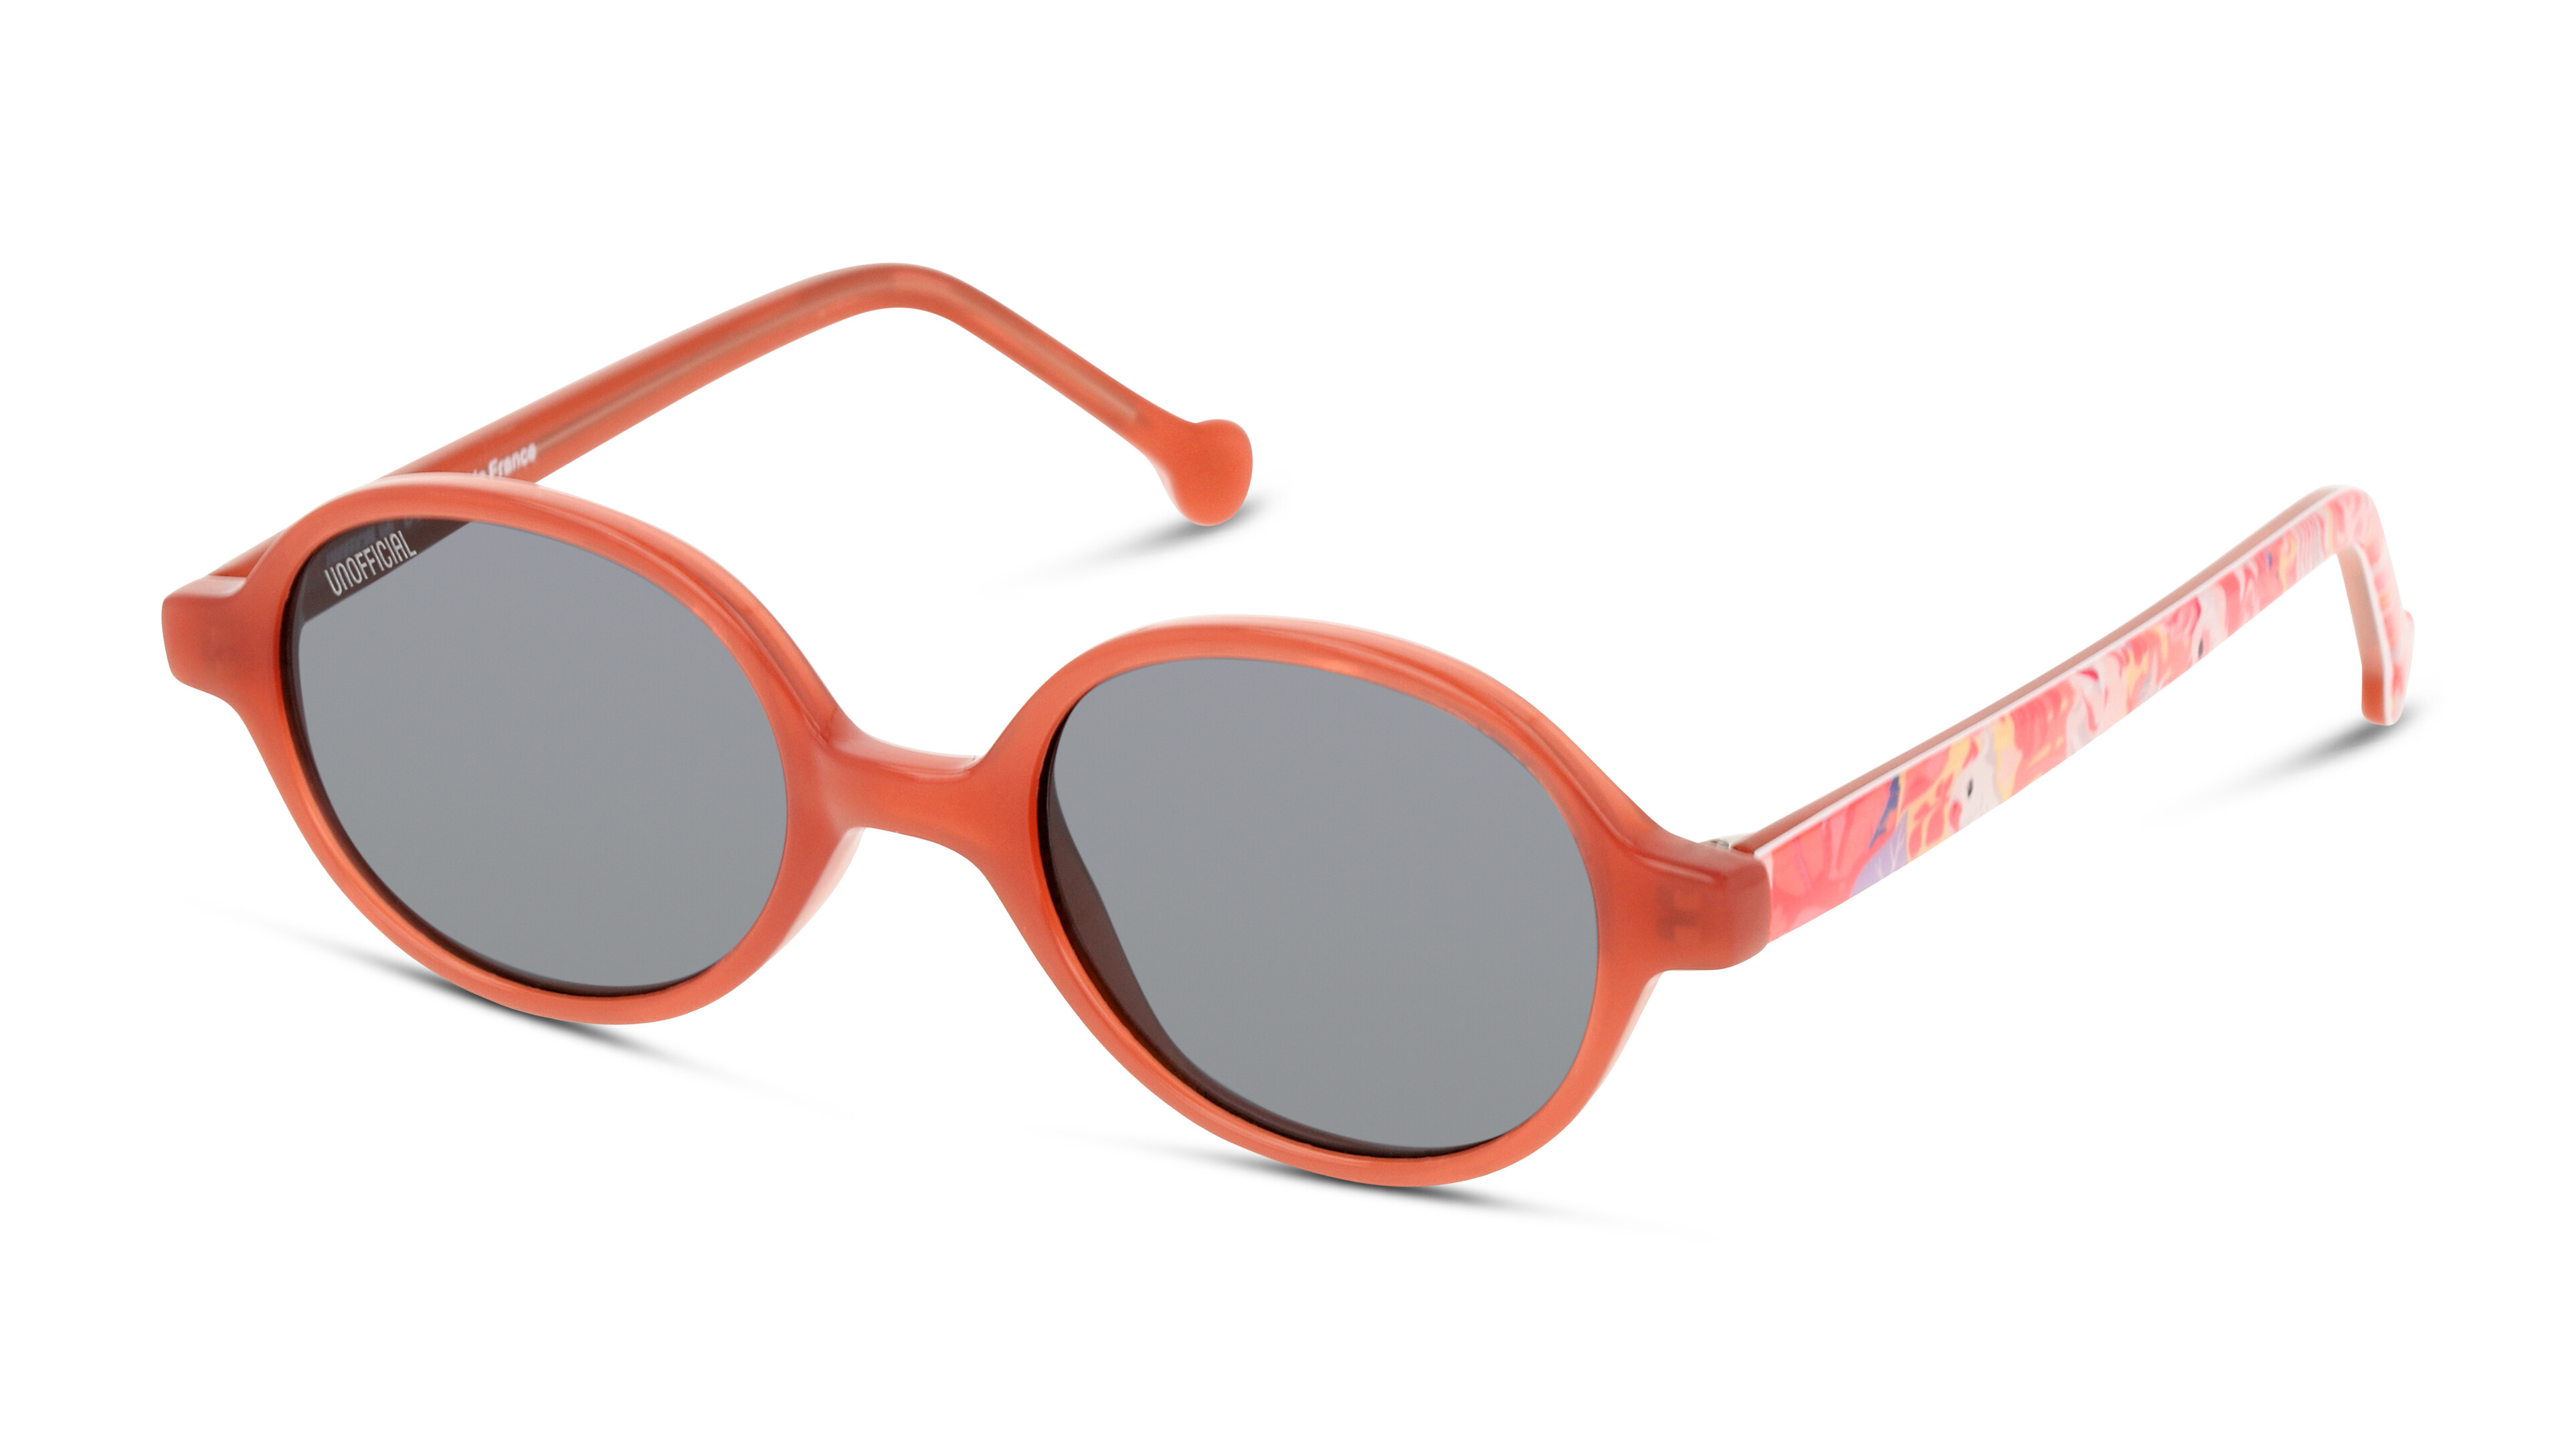 [products.image.angle_left01] UNOFFICIAL UNSK0019 PPG0 Sonnenbrille